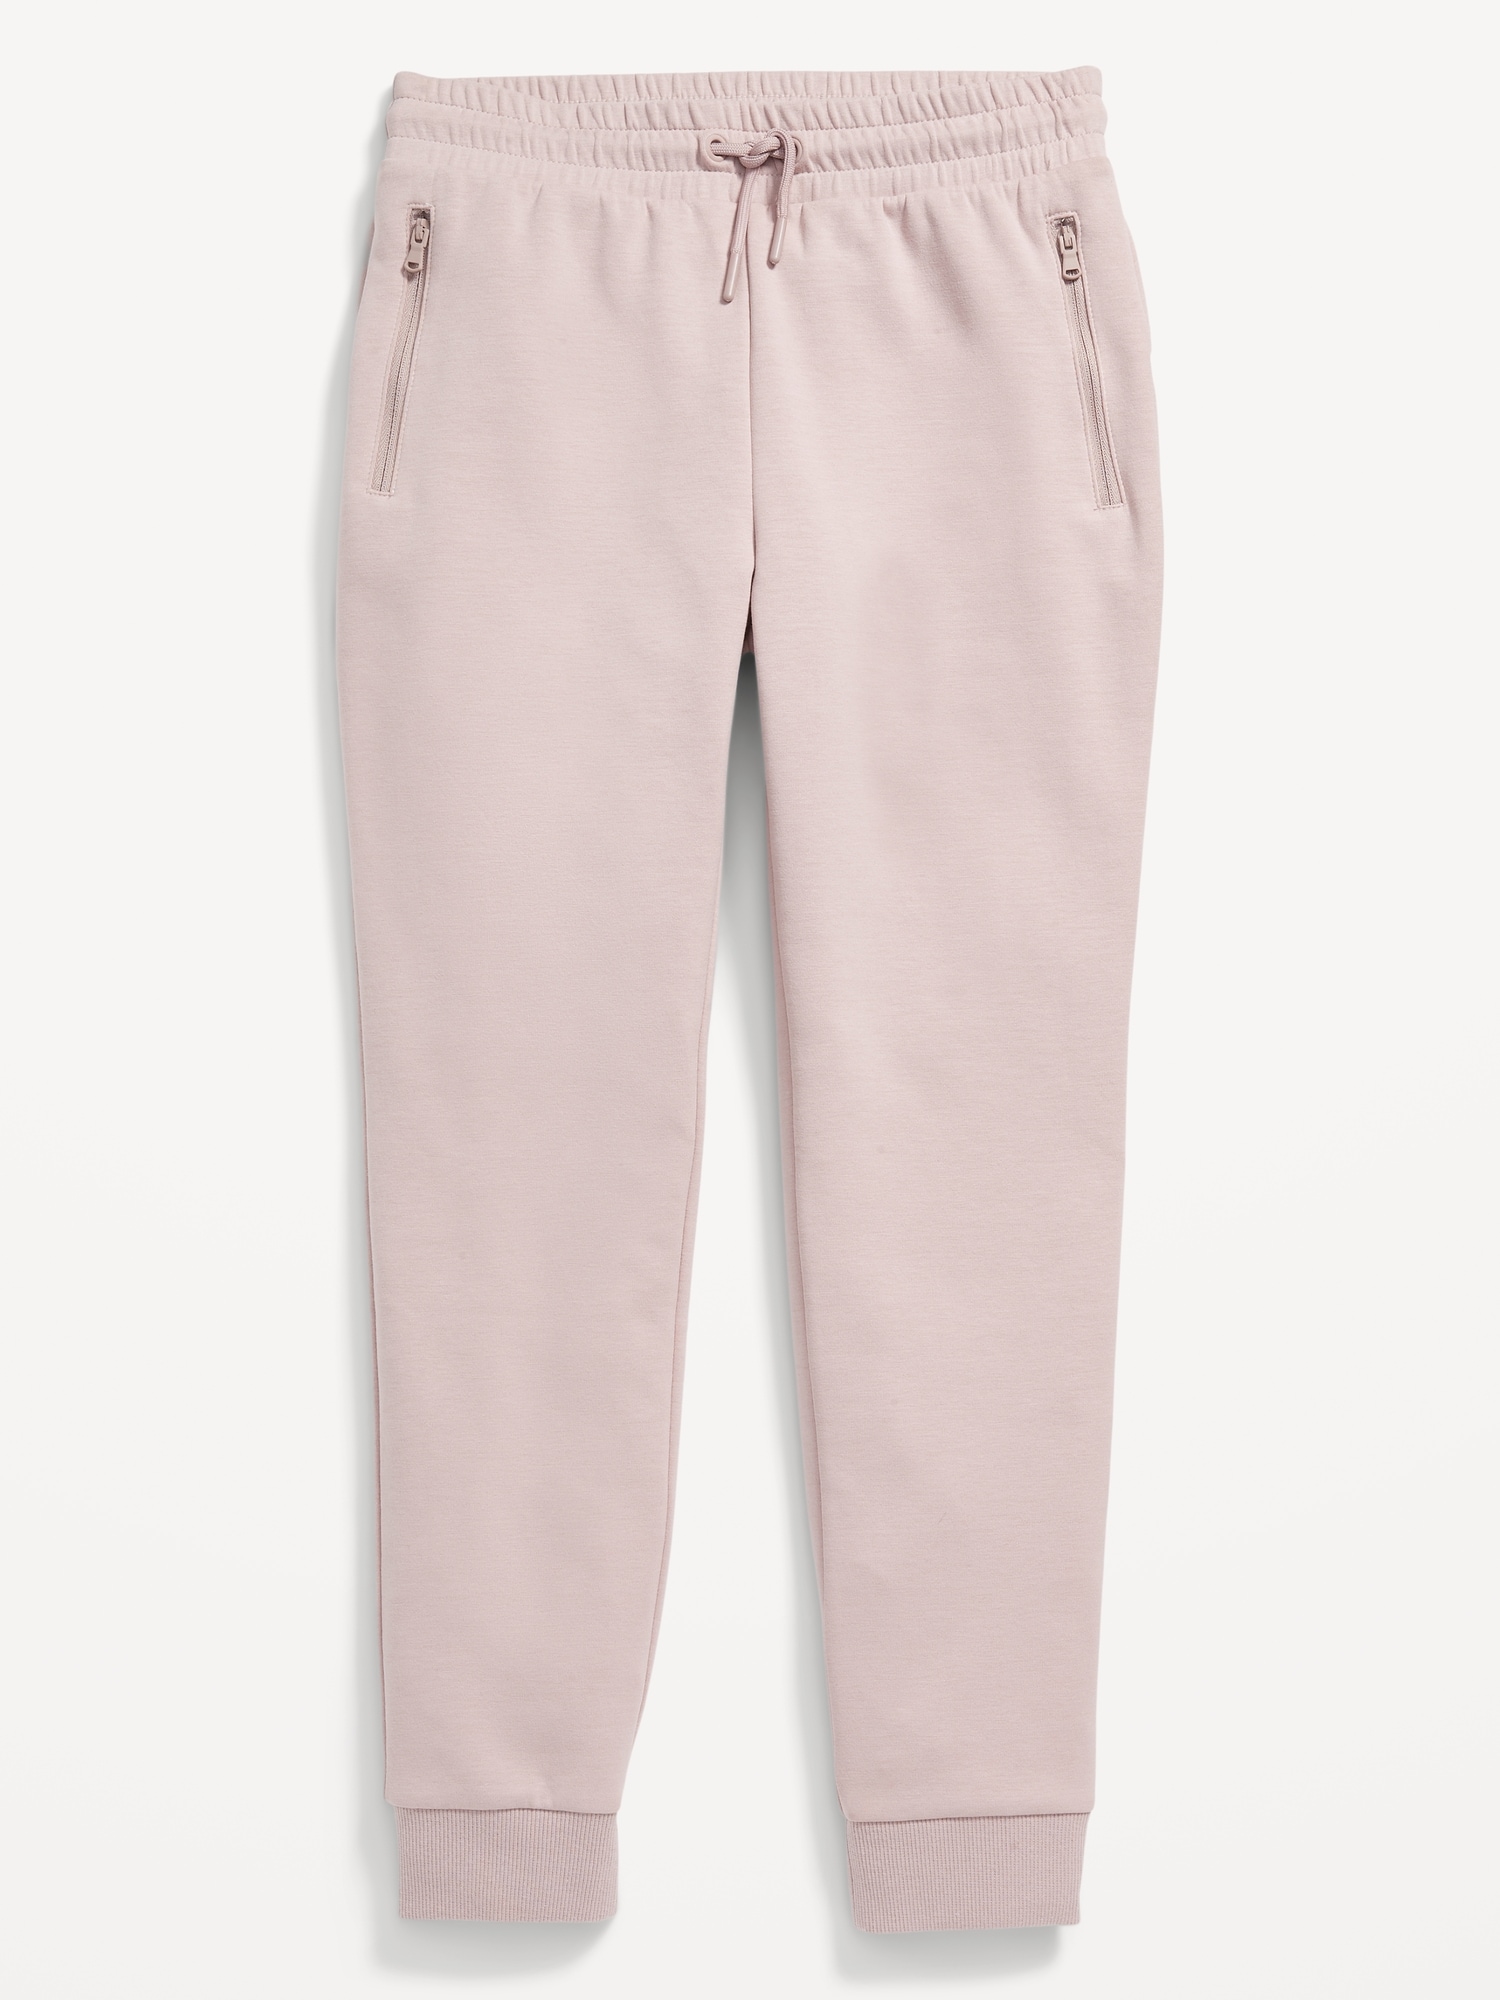 Old Navy High-Waisted Dynamic Fleece Joggers for Women